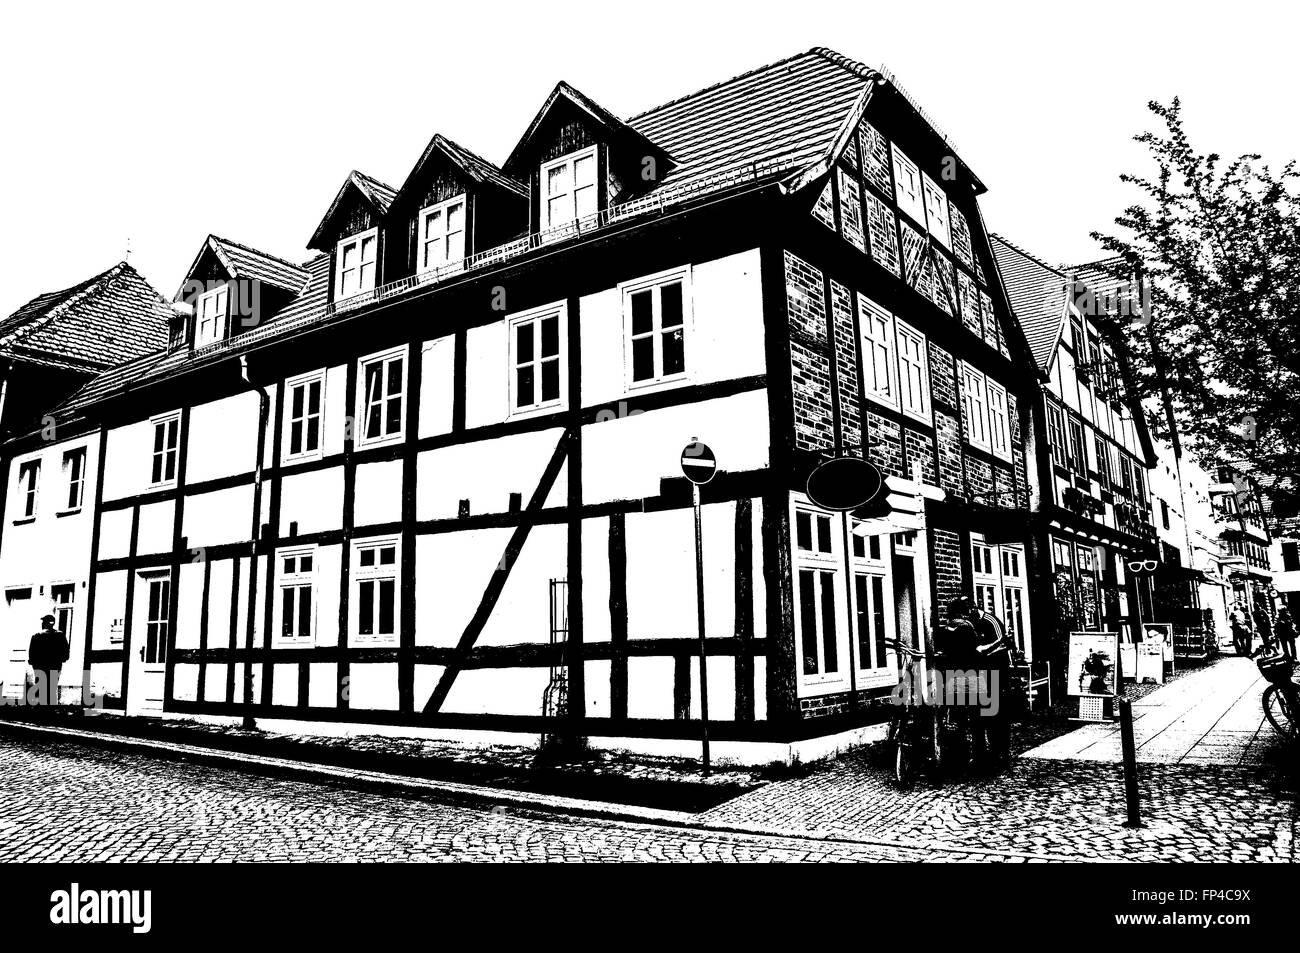 Monochrome of Small town Frame house cityscape in Northern Germany Stock Photo